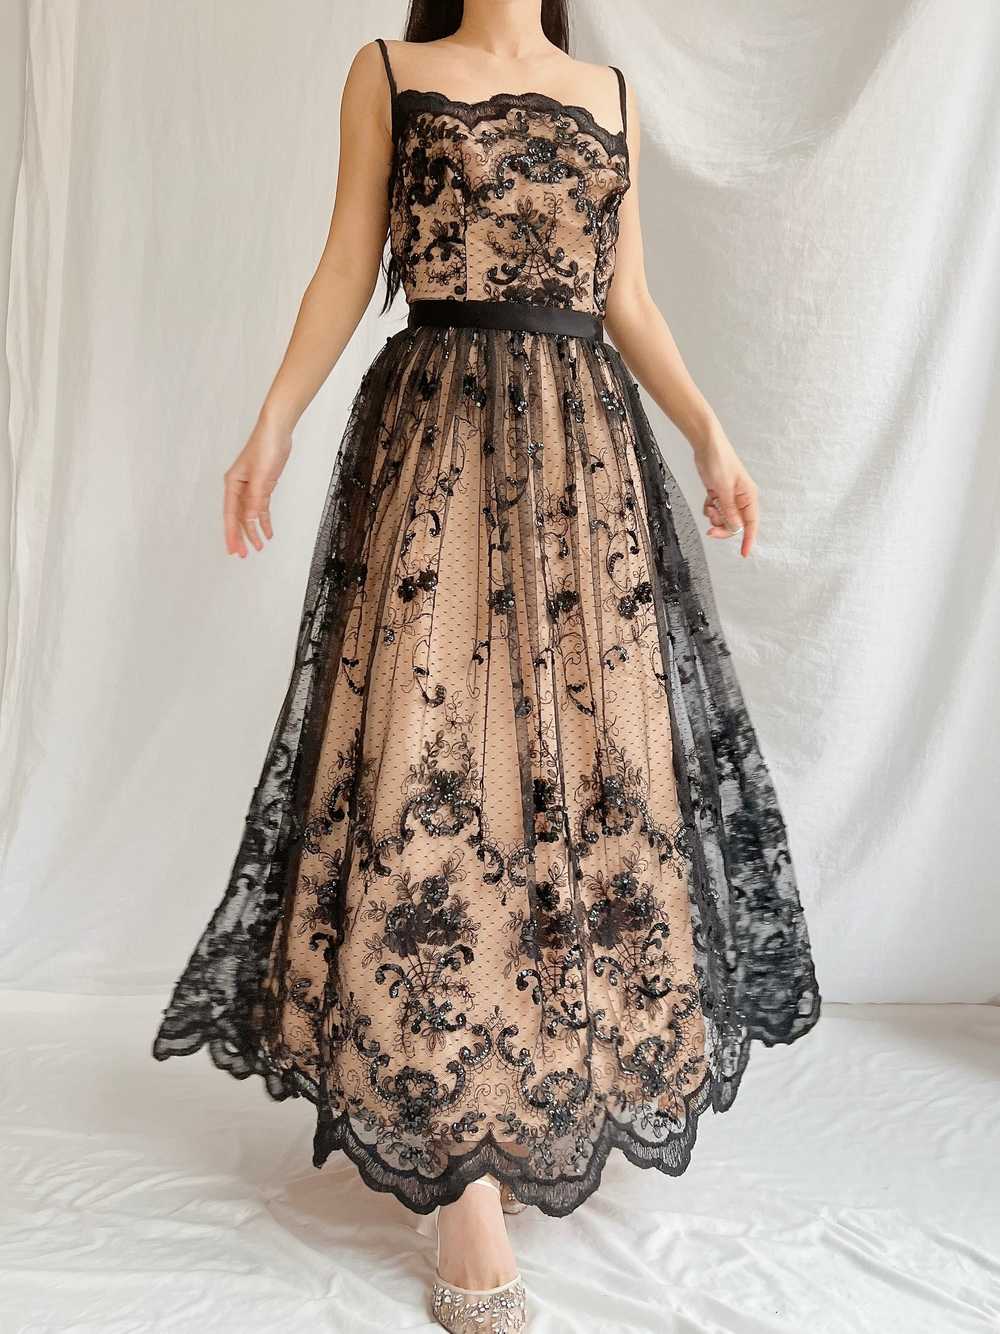 Vintage Nude and Black Lace Dress - S - image 9